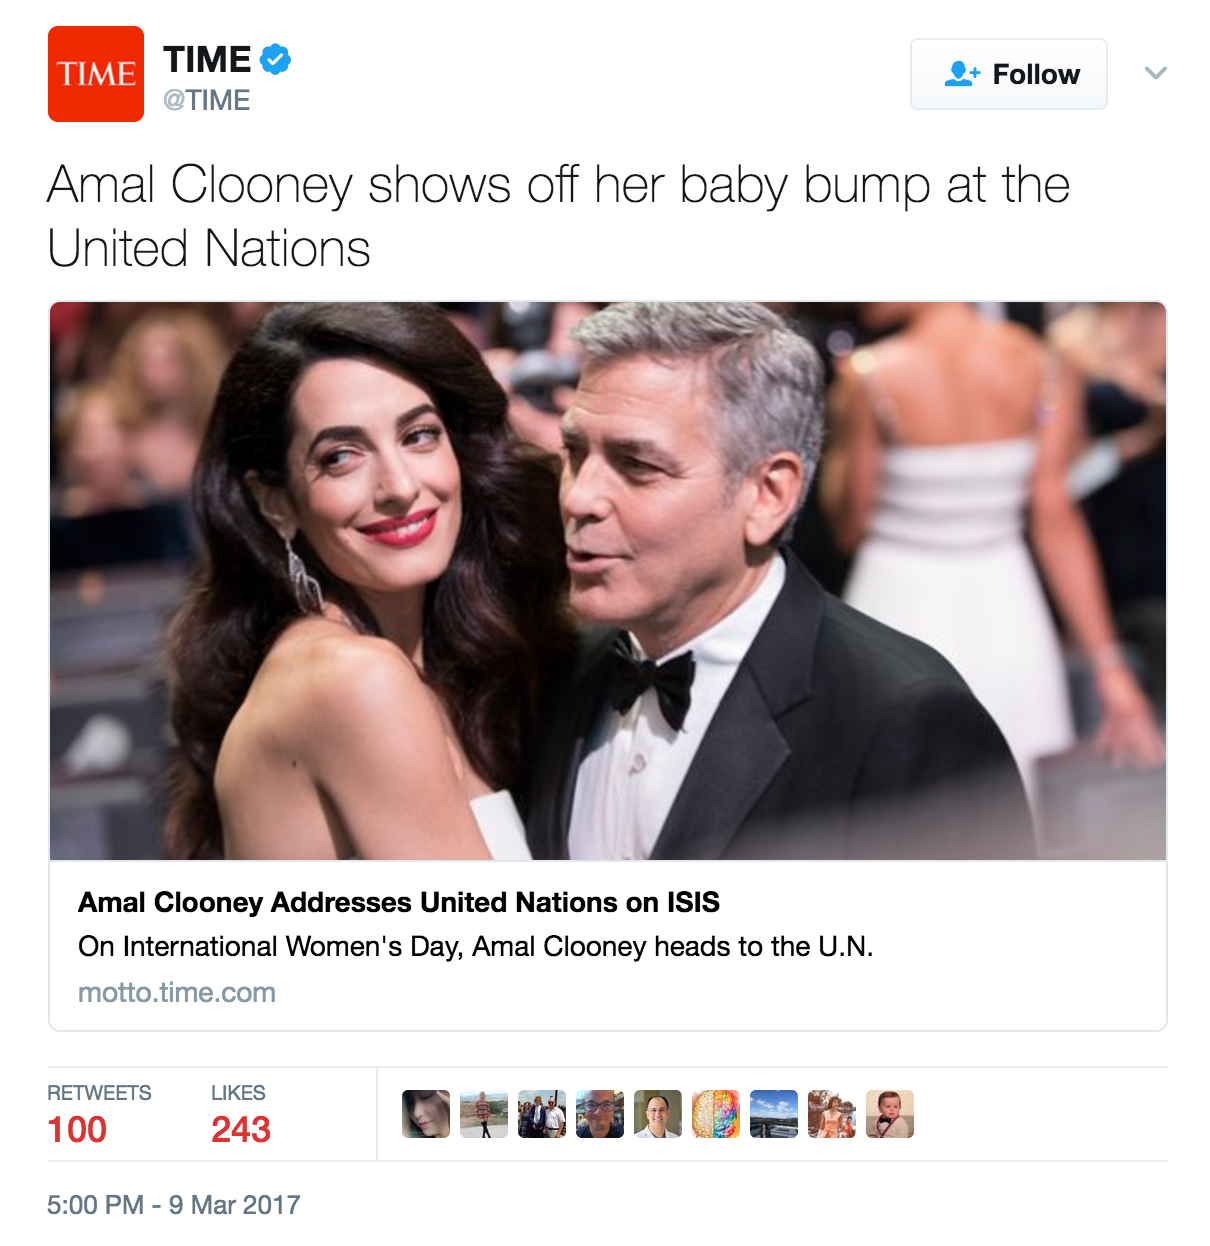 ENTITY reports on Amal Clooney's UN speech and criticizes those talking about her baby bump.